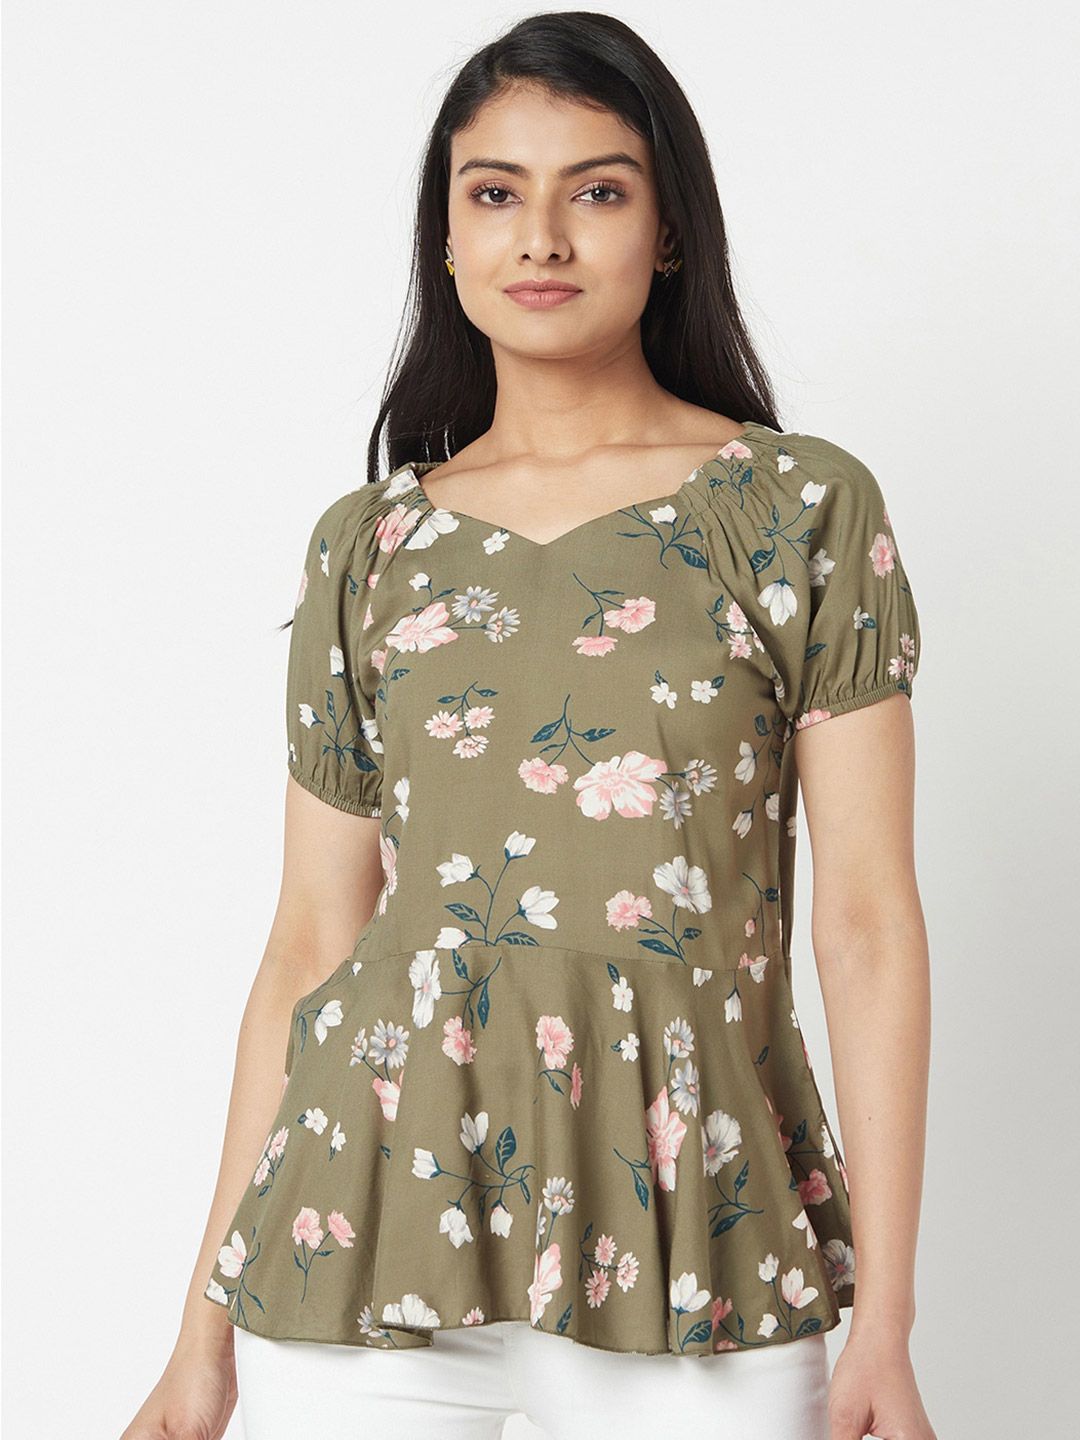 Miss Grace Floral Printed Sweetheart Neck Peplum Top Price in India